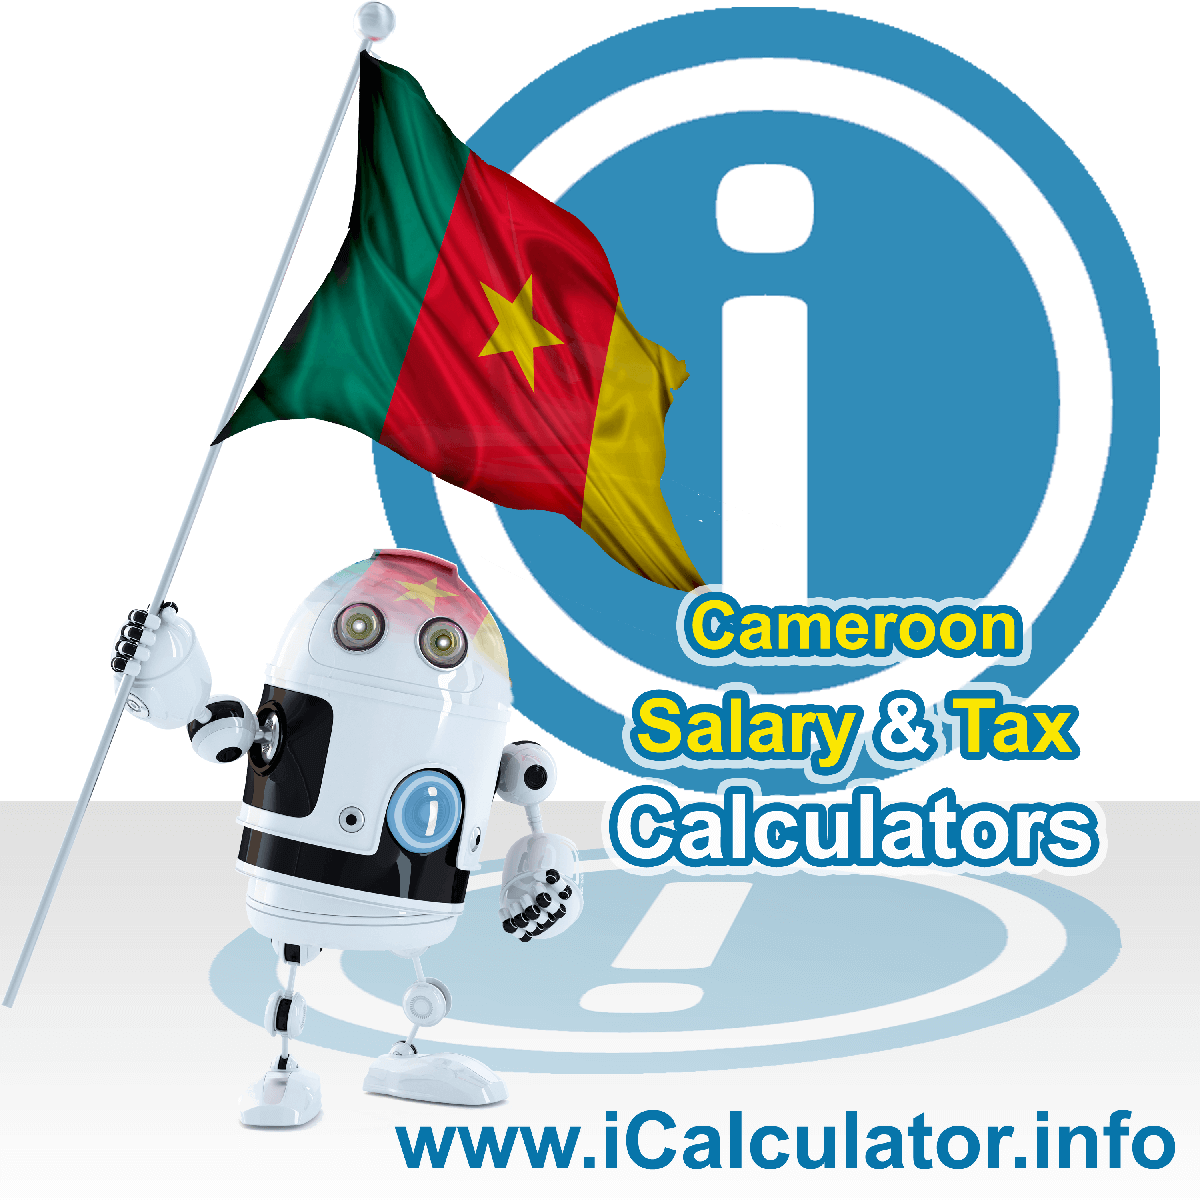 Cameroon Salary Calculator. This image shows the Cameroonese flag and information relating to the tax formula for the Cameroon Tax Calculator